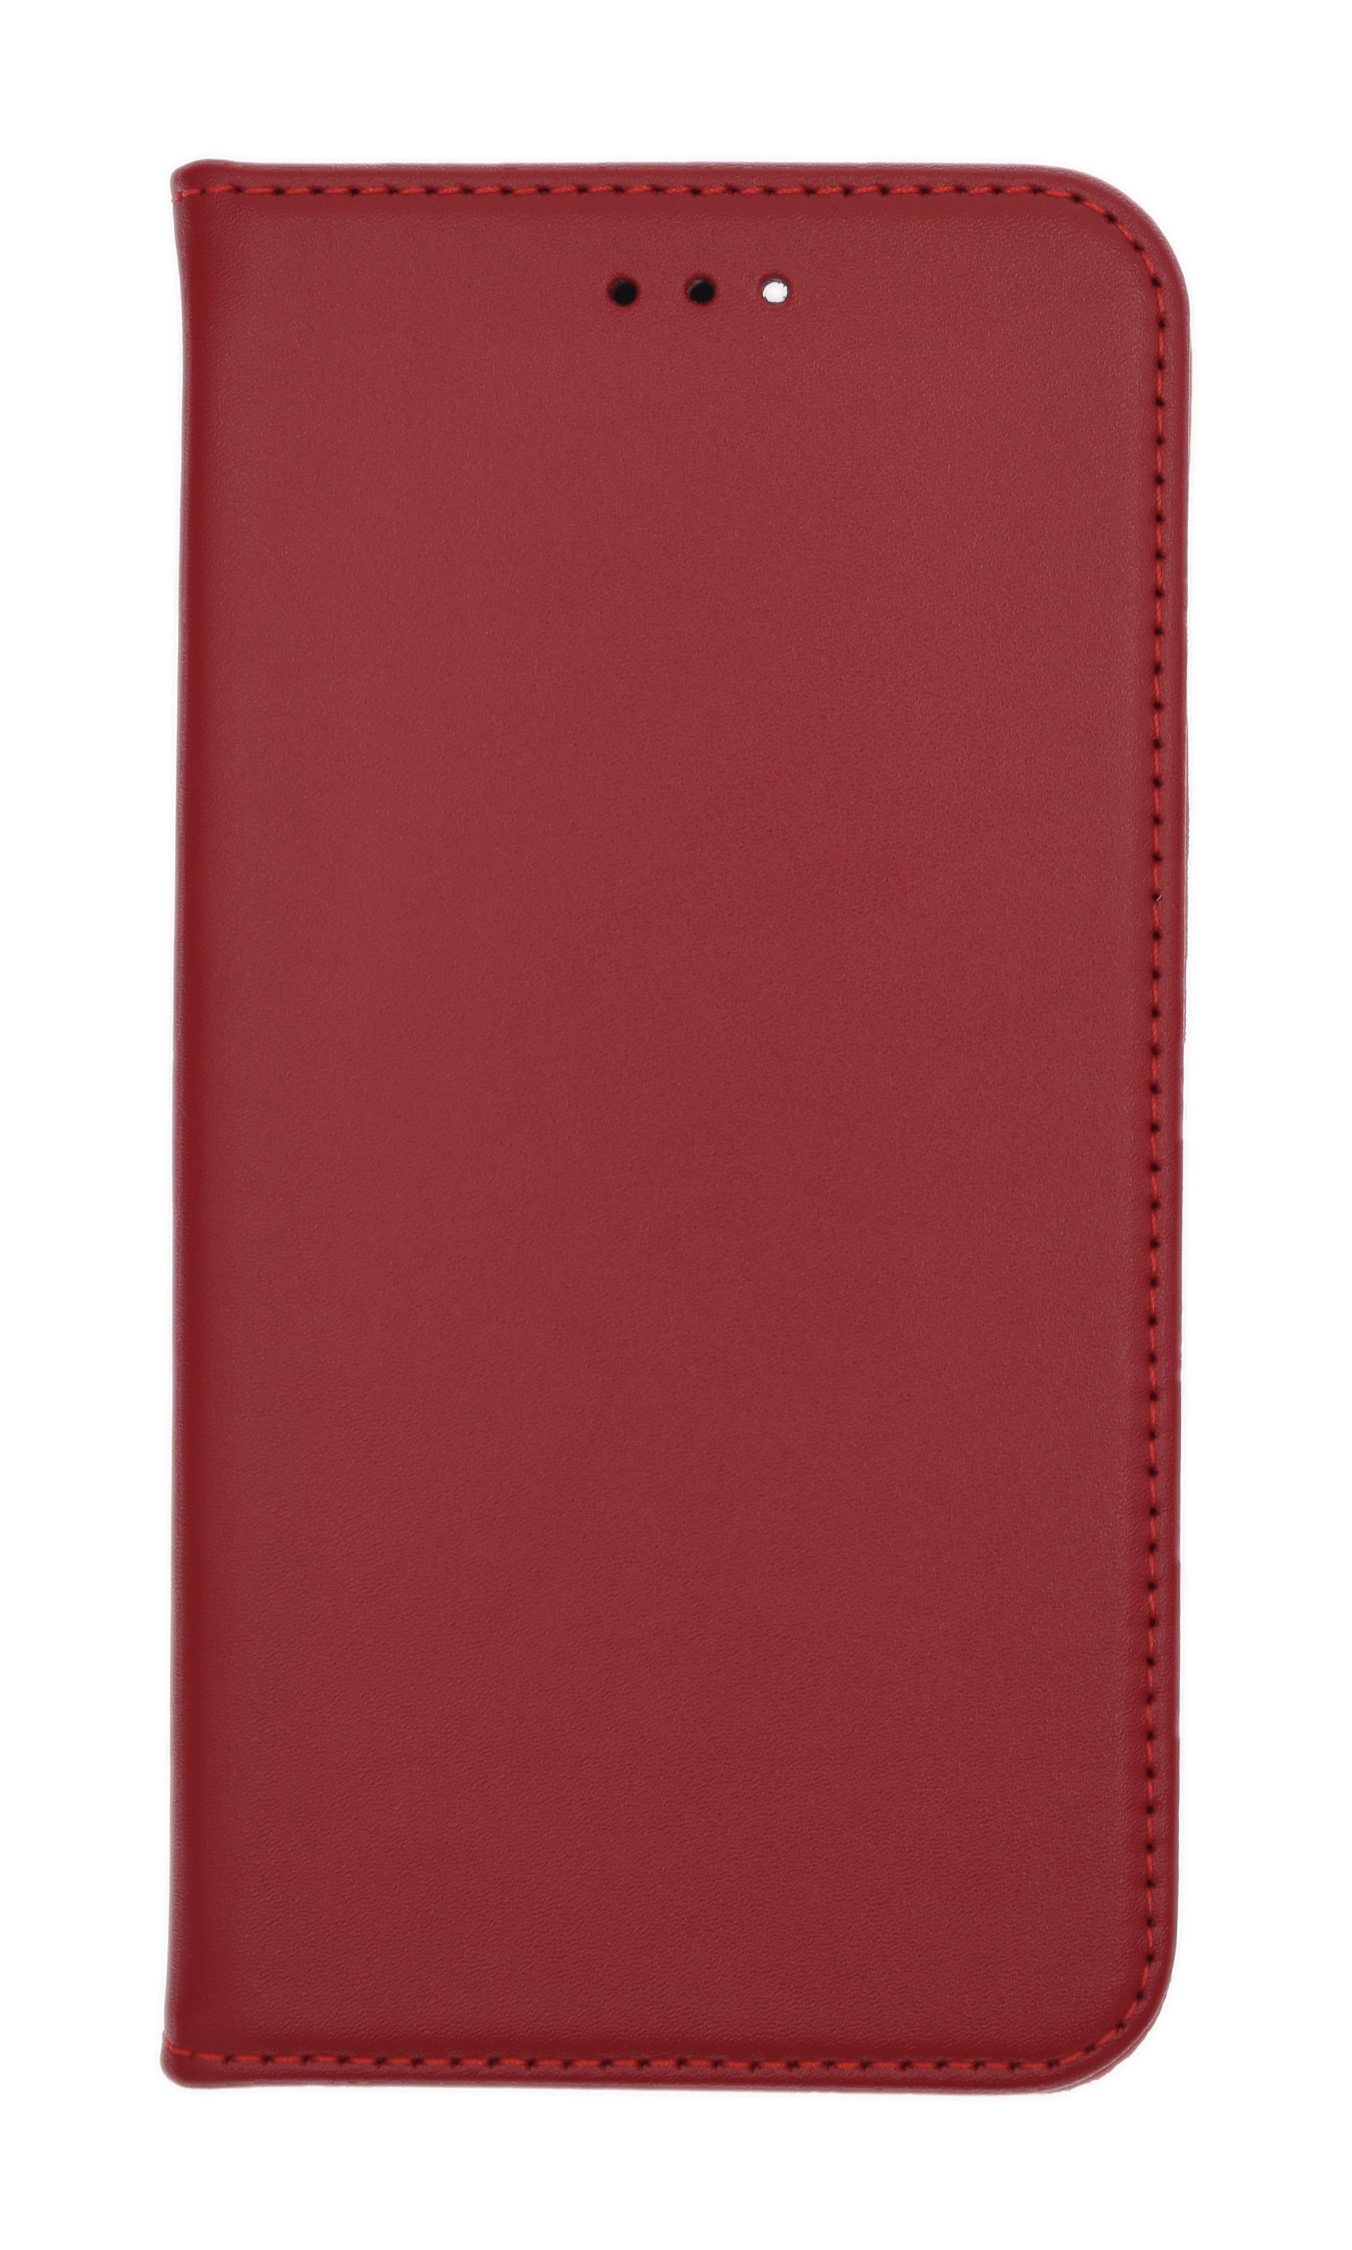 JAMCOVER Echt Leder Plus, Apple, Bookcase, iPhone Weinrot Bookcover, 14